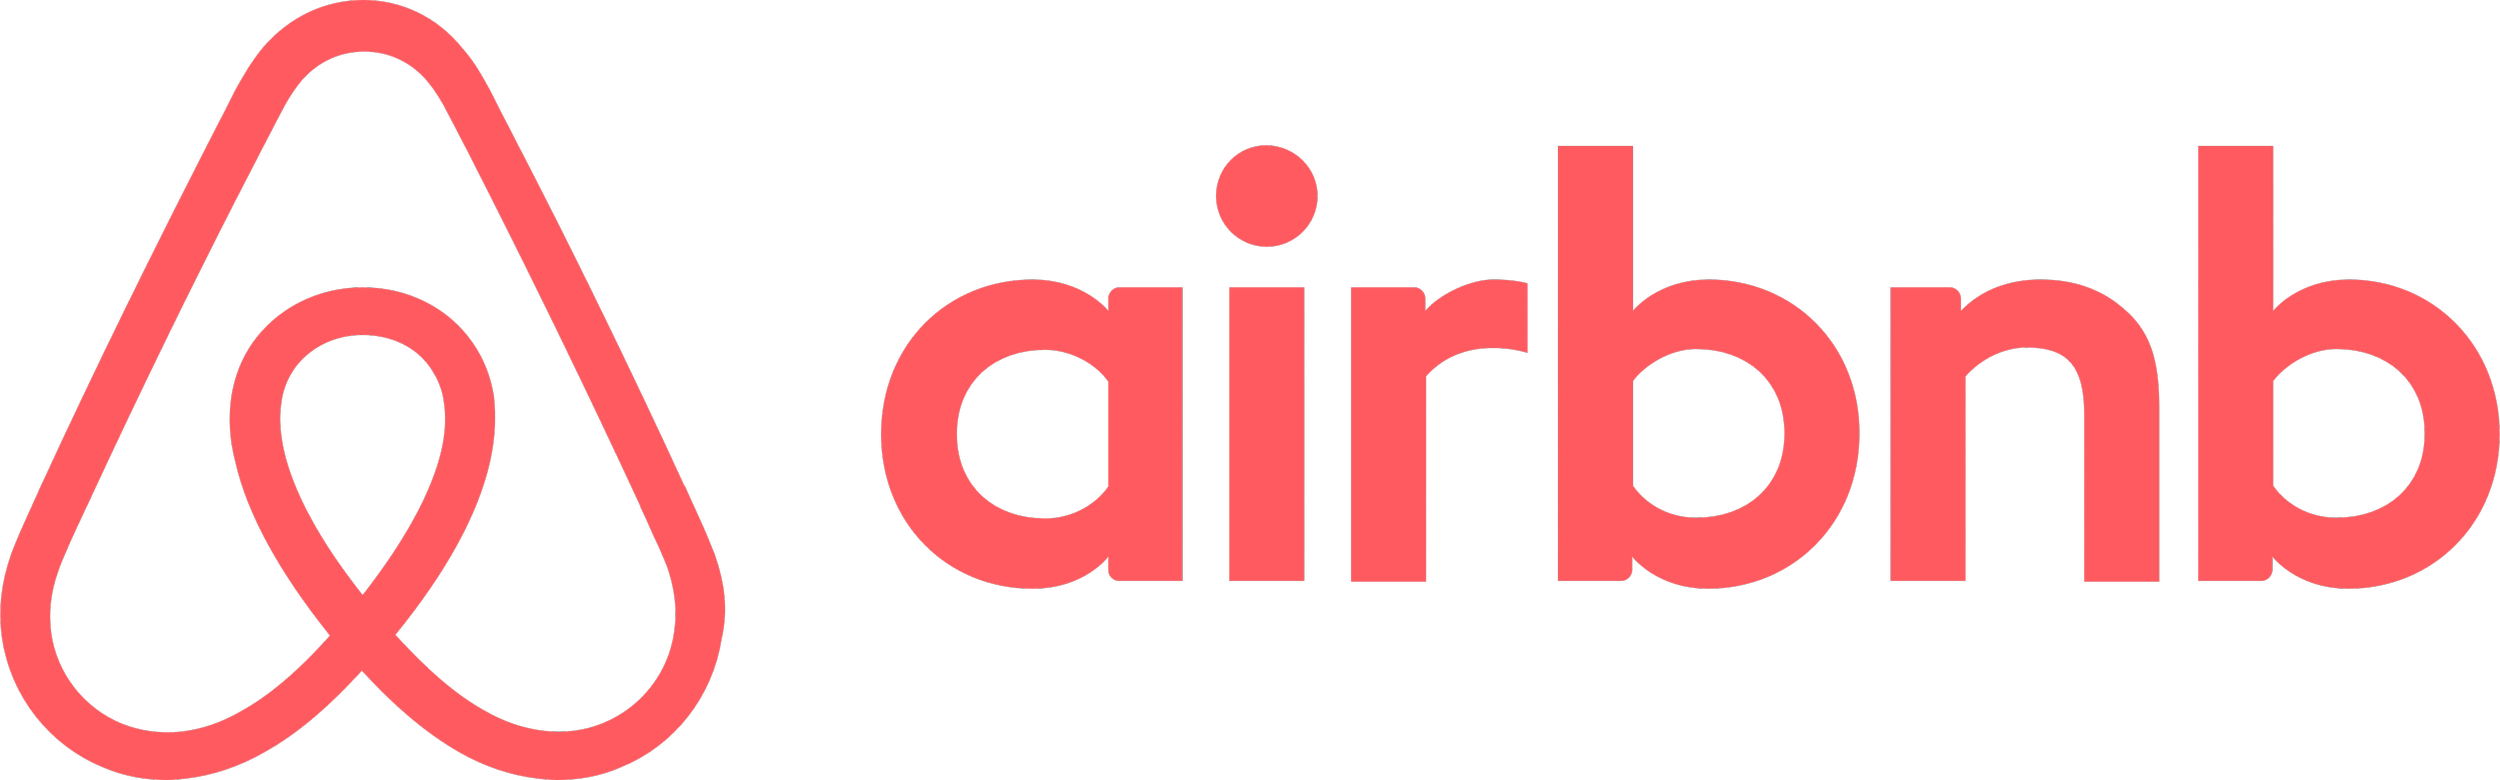 Airbnb_logo-3907545000.png